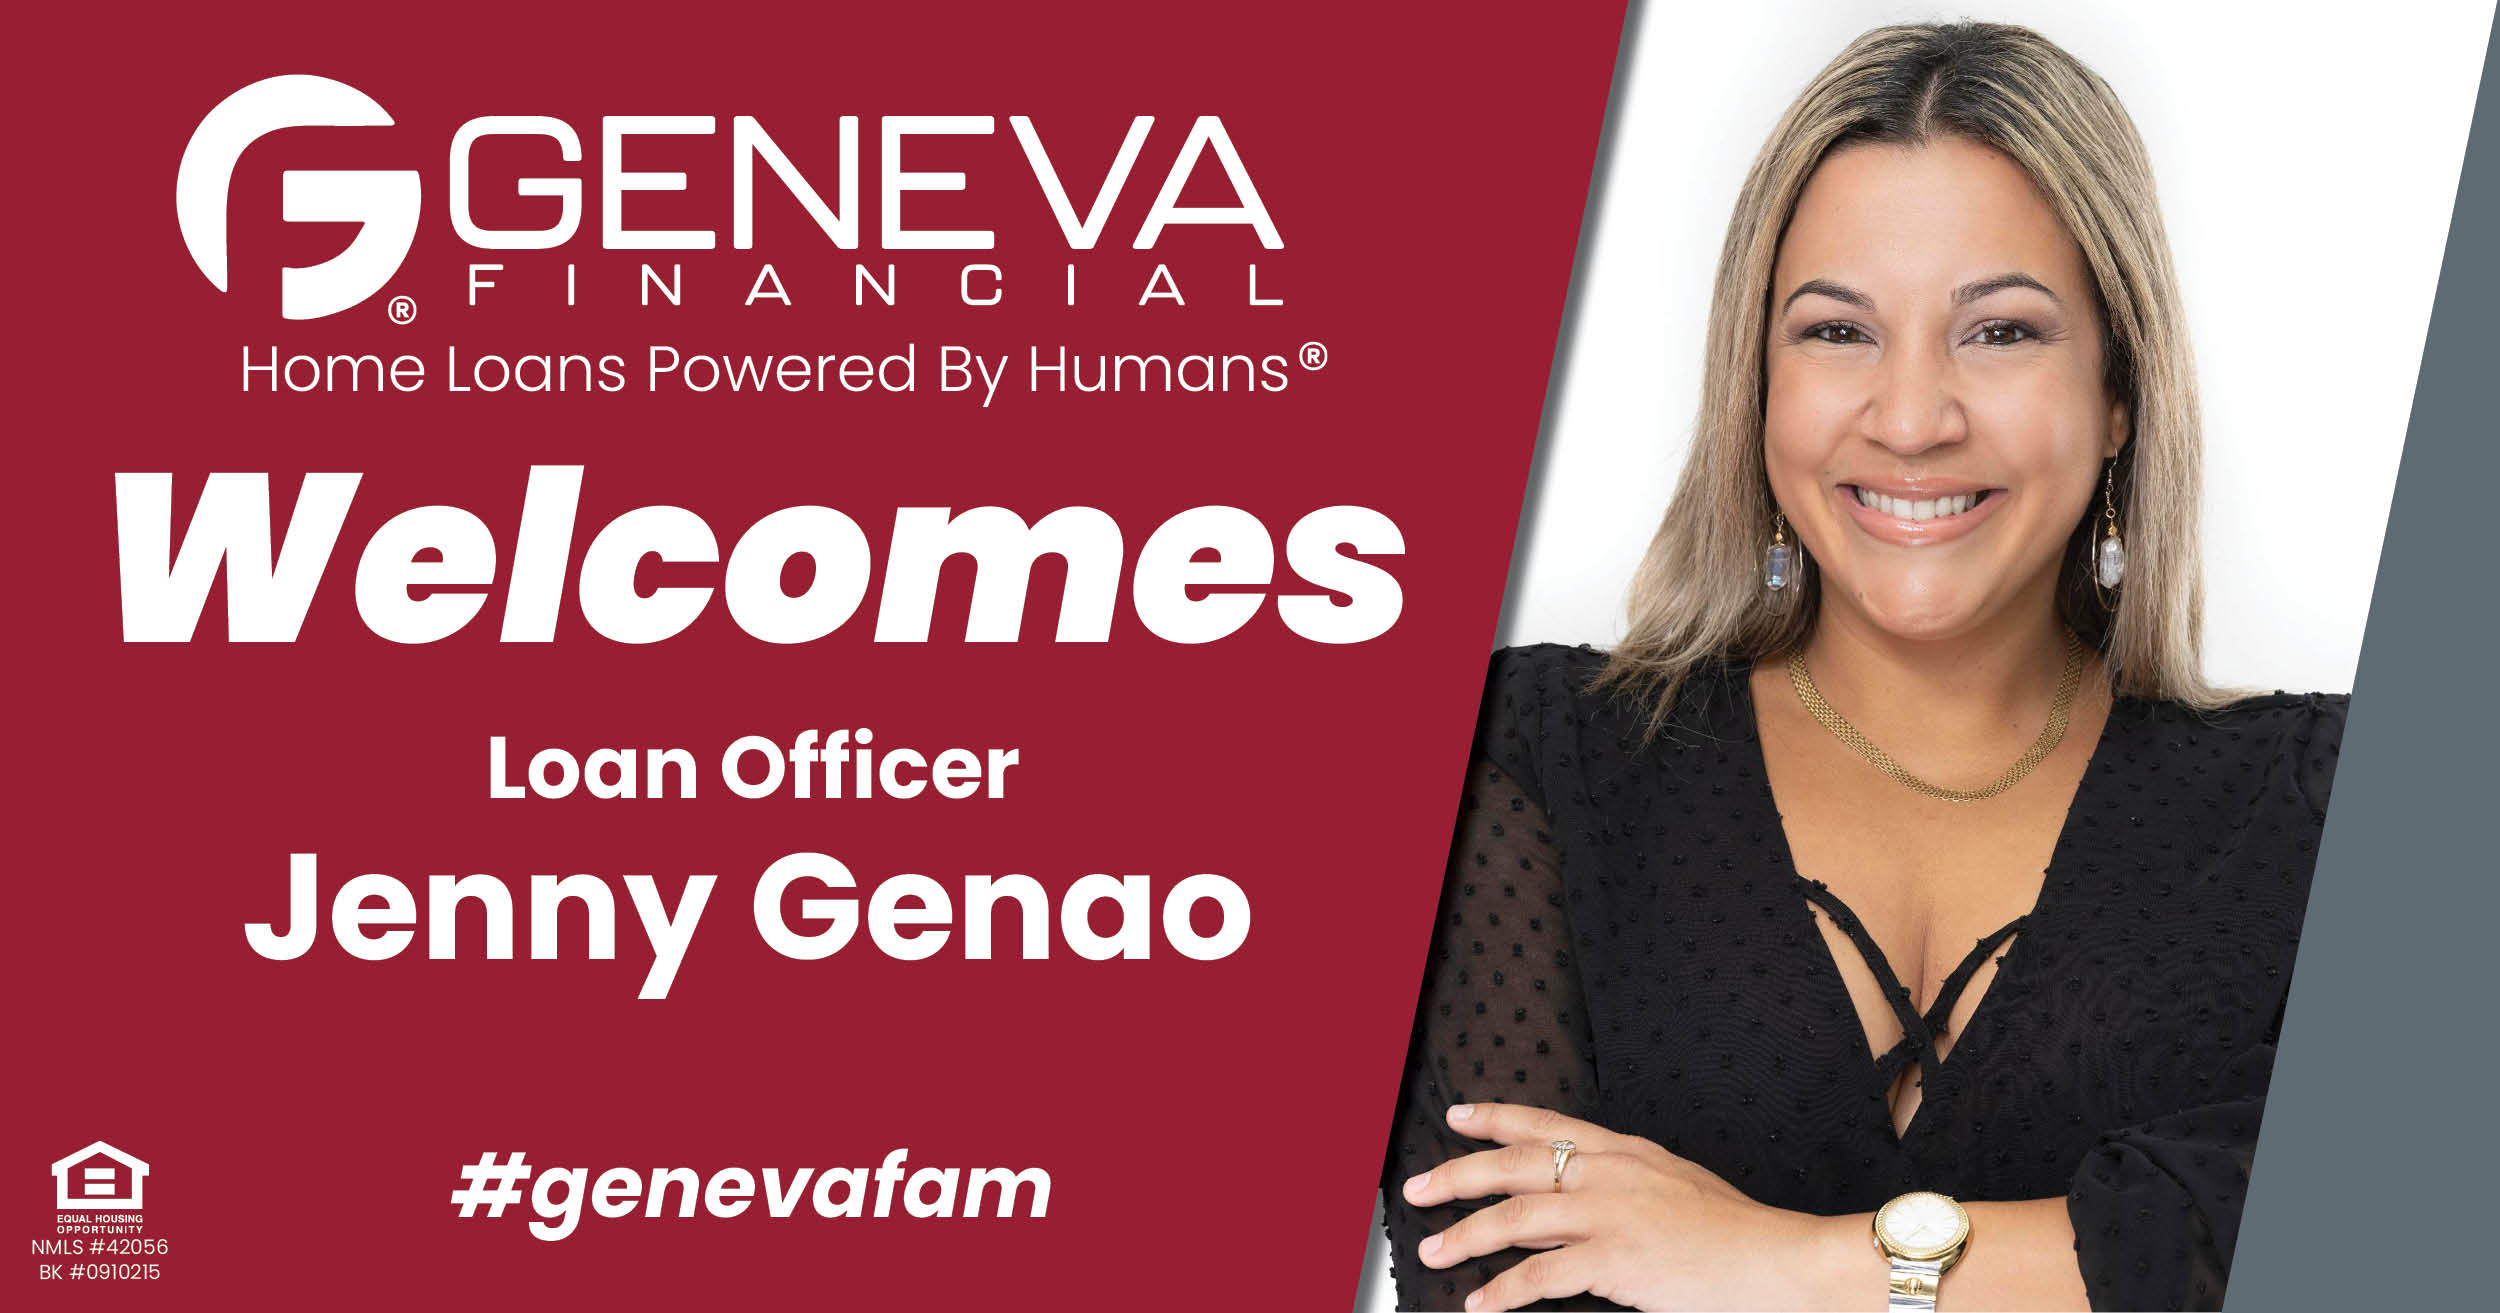 Geneva Financial Welcomes New Loan Officer Jenny Genao to Davenport, Florida – Home Loans Powered by Humans®.